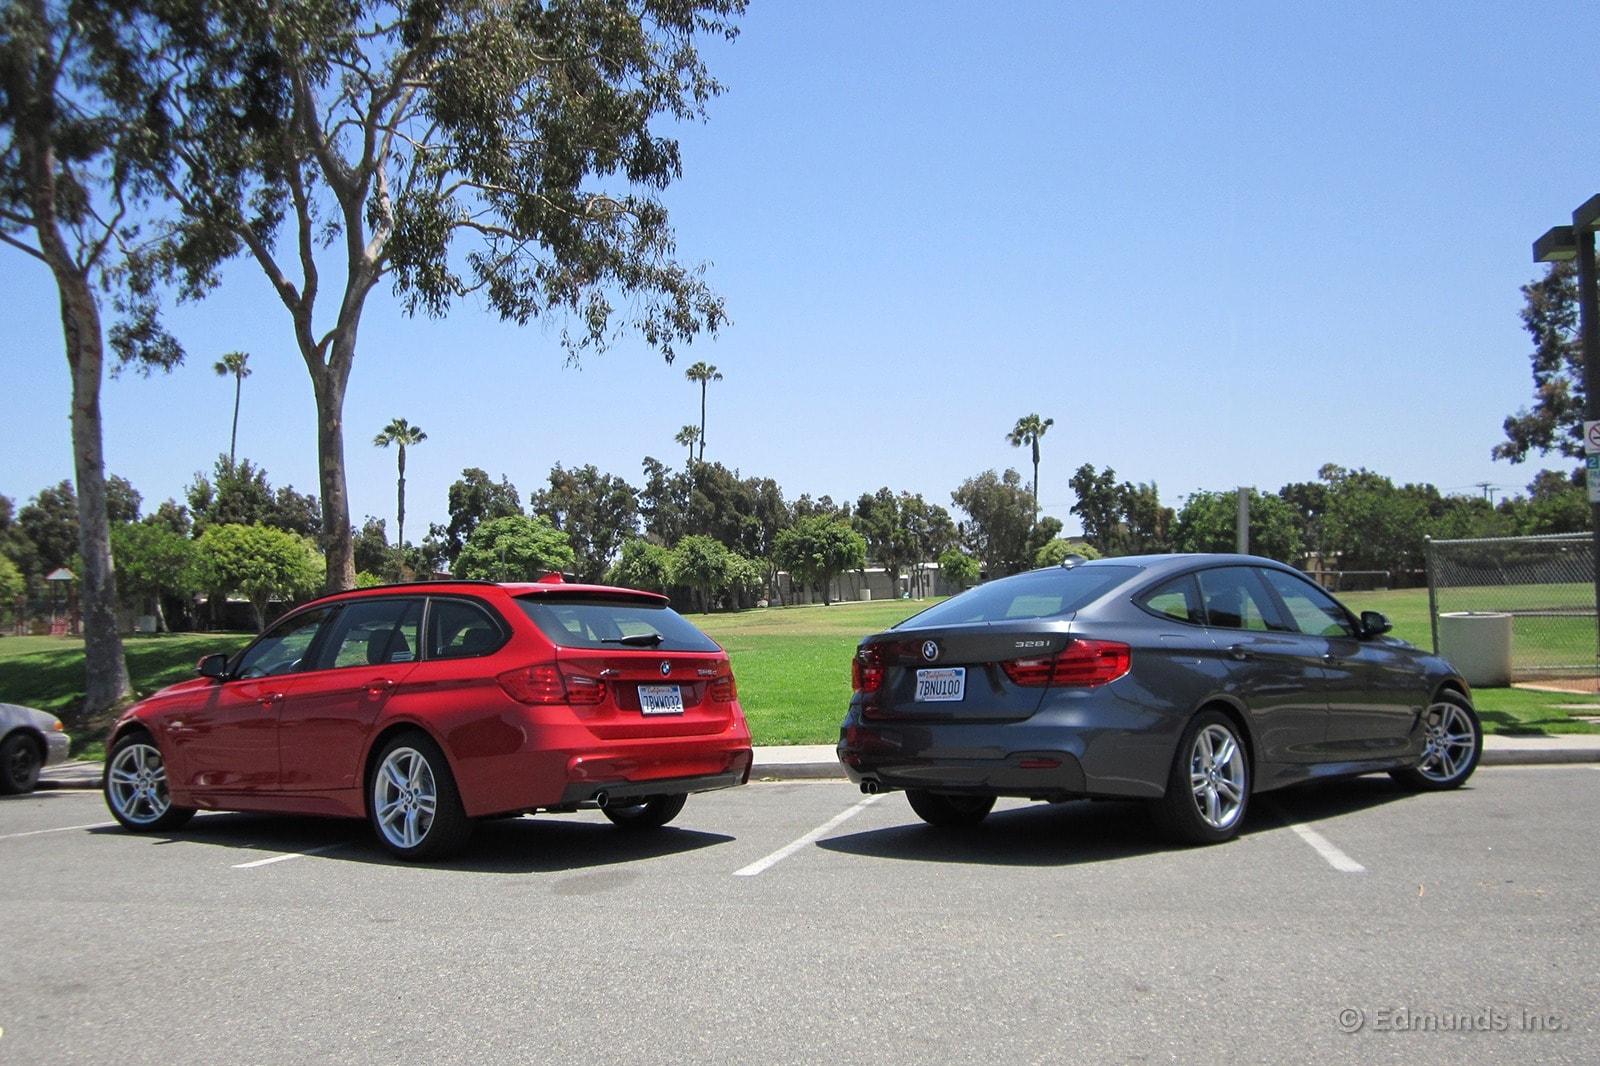 2014 BMW 328i xDrive Gran Turismo: What's It Like to Live With? | Edmunds